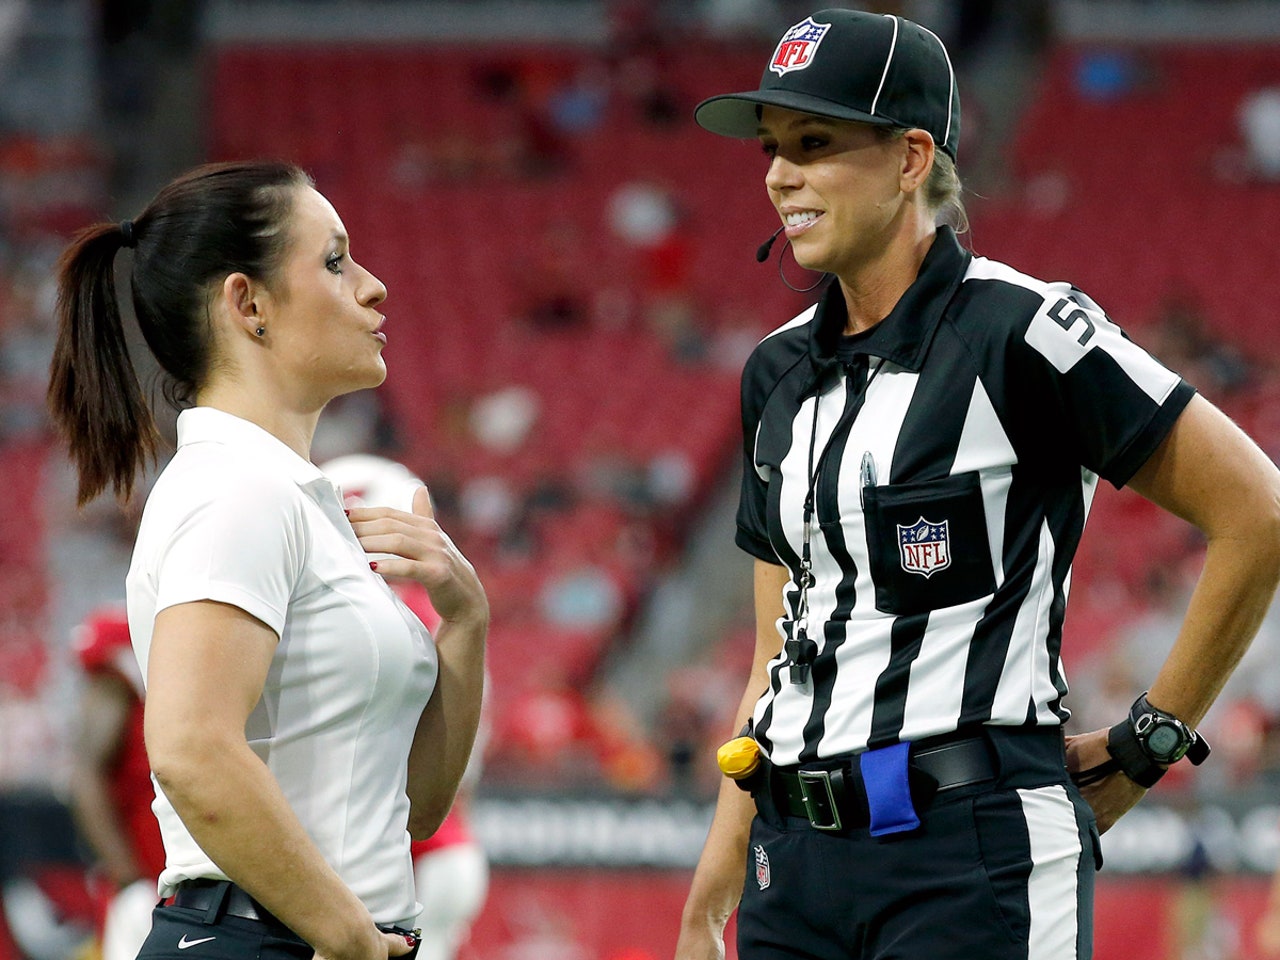 NFL's first woman ref, assistant coach meet before game